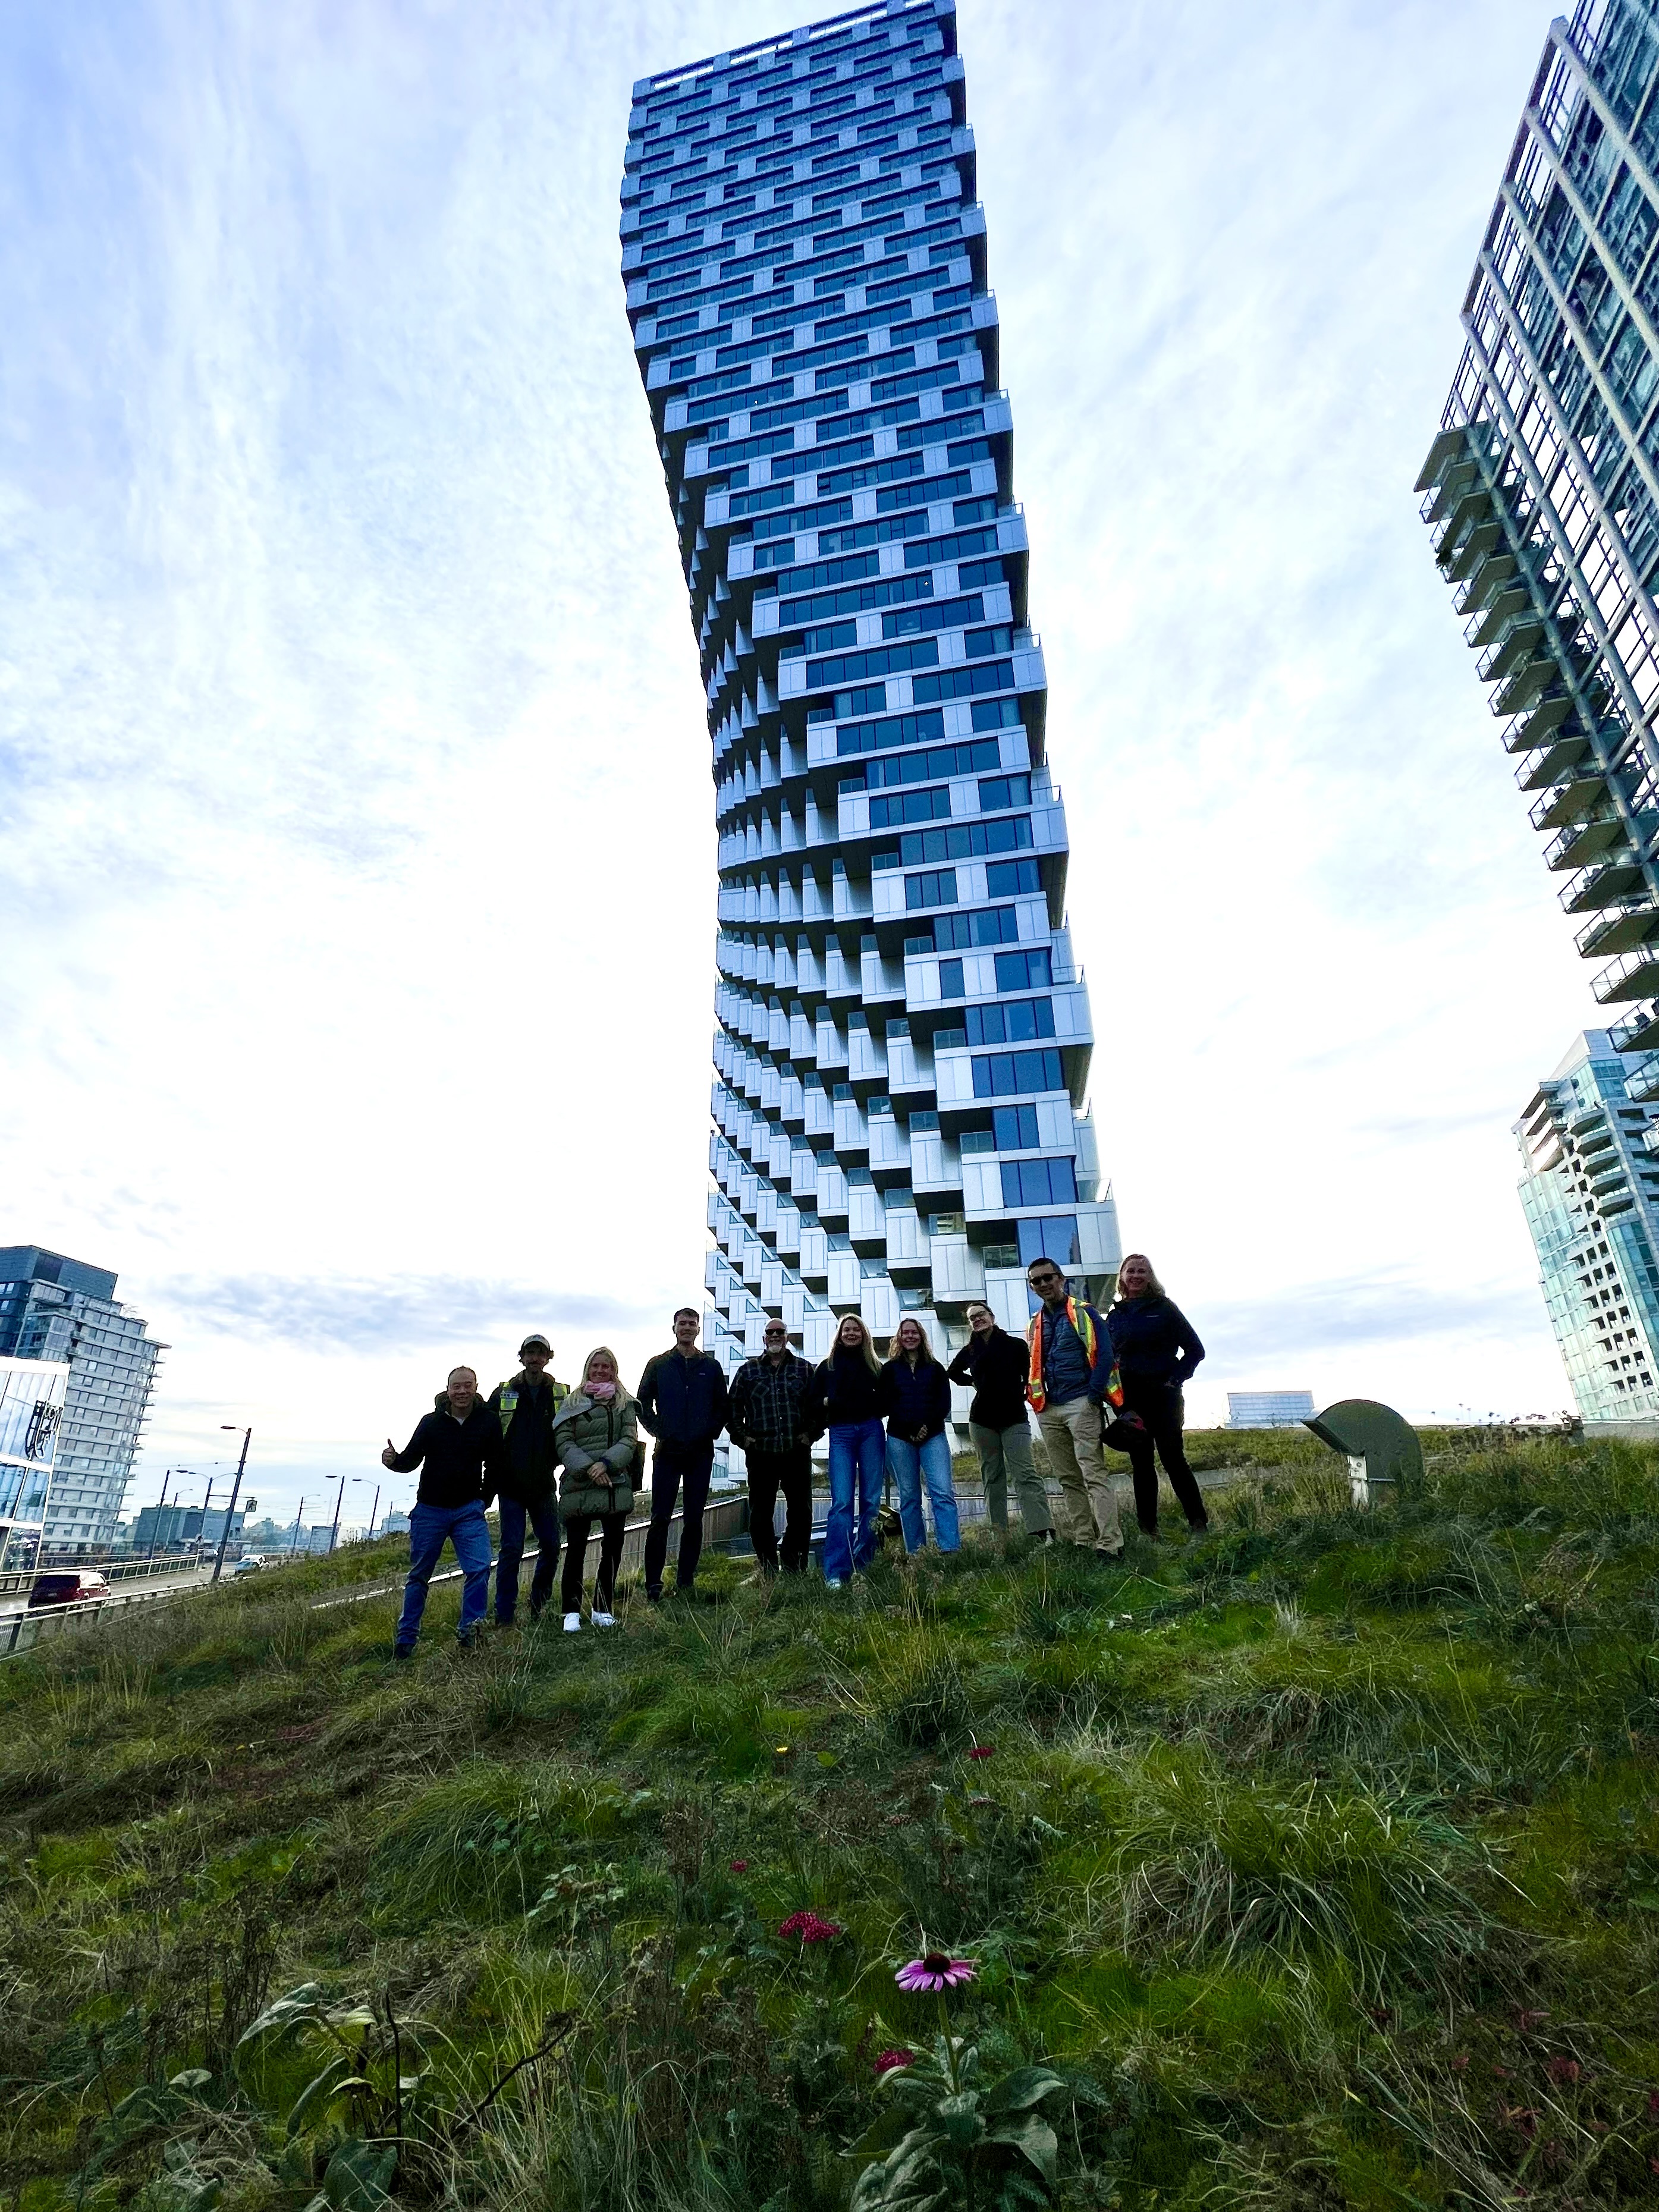 Vancouver House: A Marvel of Modern Architecture